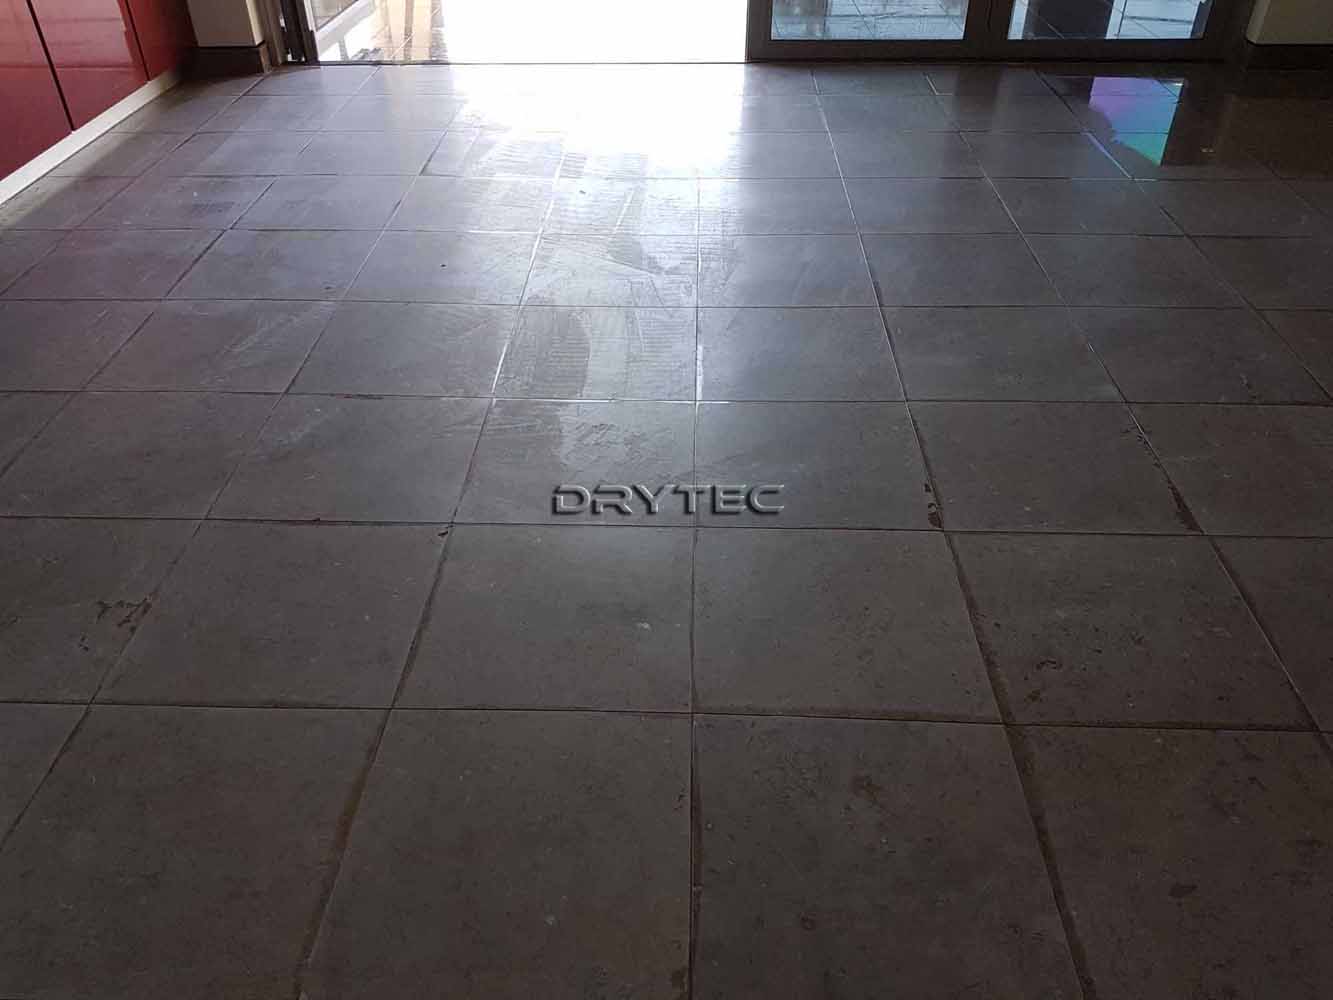 Limestone Floor Tiles Restoration-Grinding-Honing-Polishing-Cleaning and Sealing Service in Perth WA